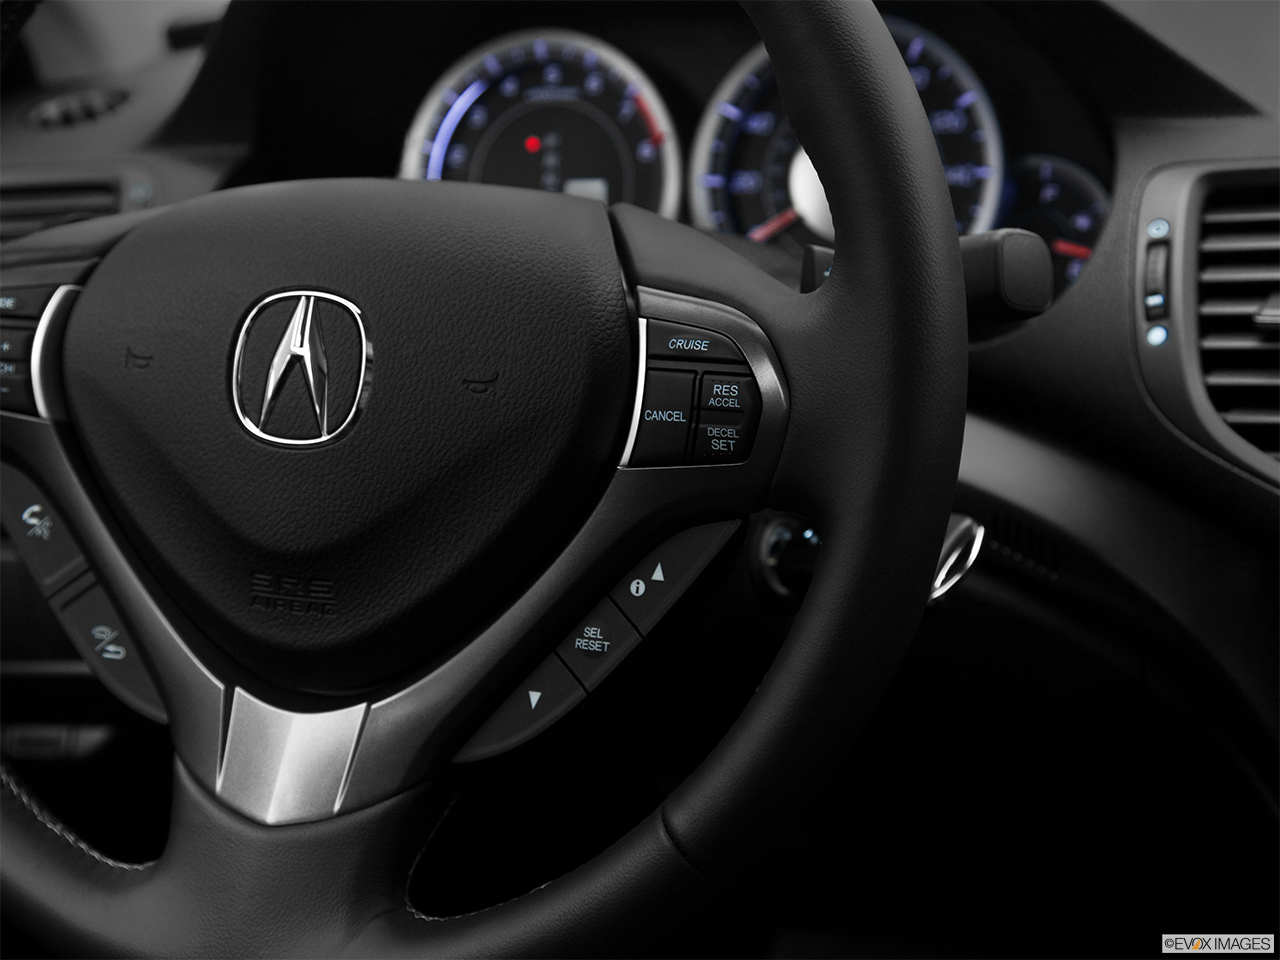 2011 Acura TSX TSX 5-speed Automatic Steering Wheel Controls (Right Side) 